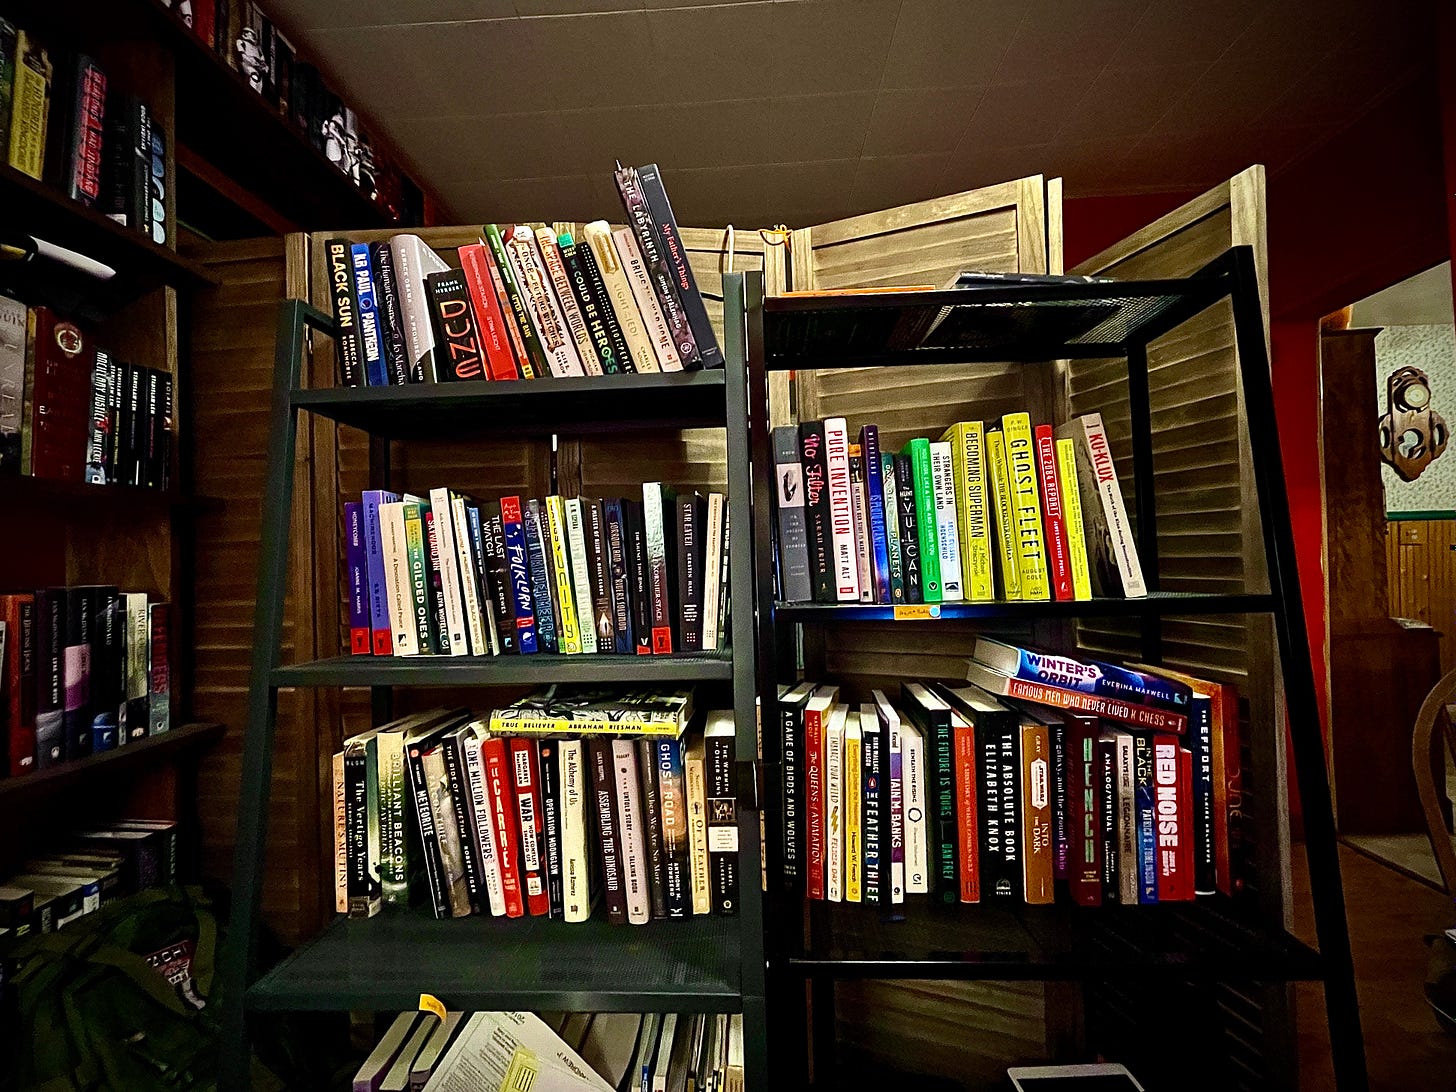 Two bookshelves, loaded down with colorful books. 